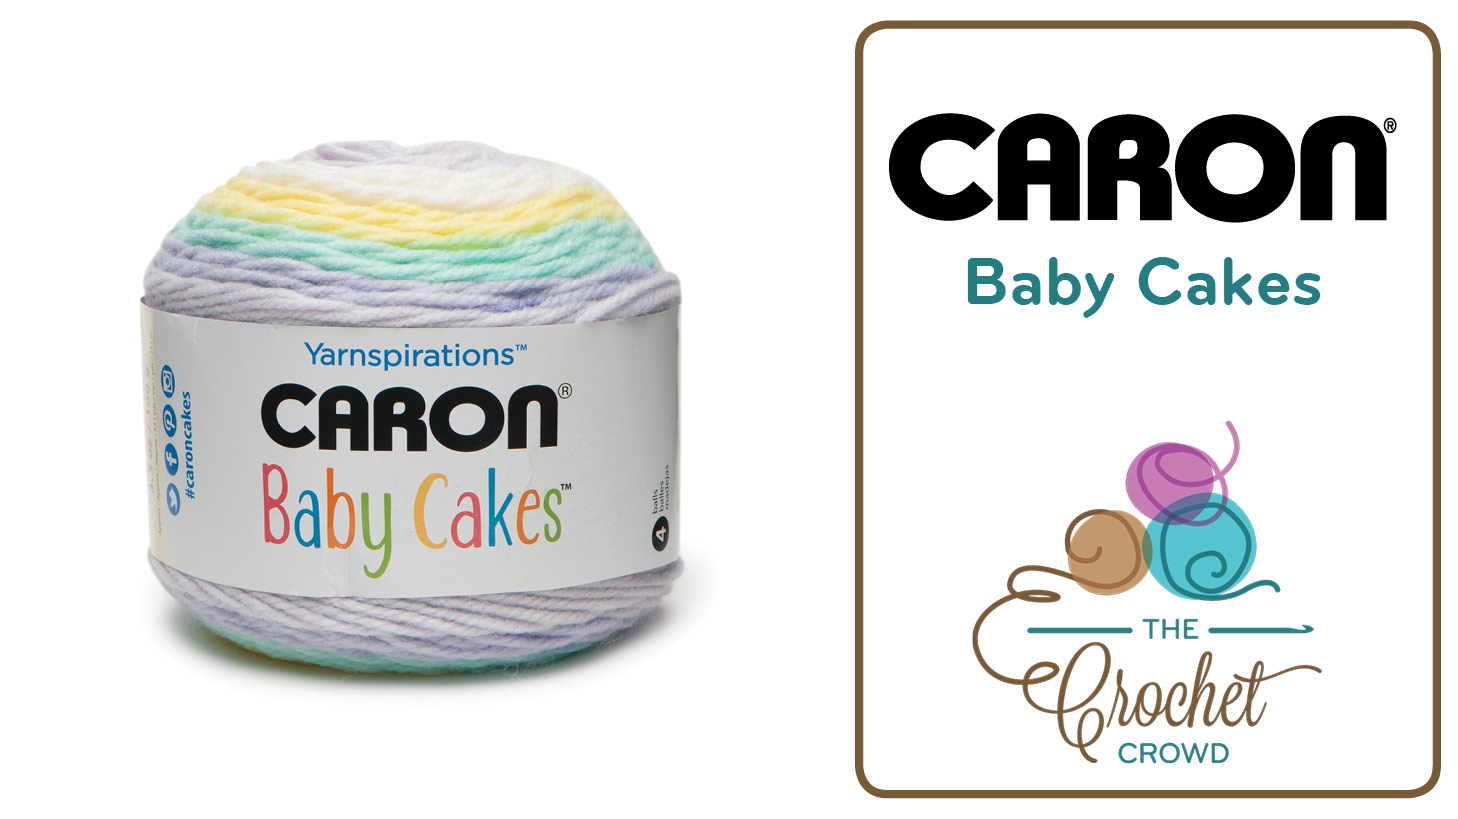 What To Do With Caron Baby Cakes